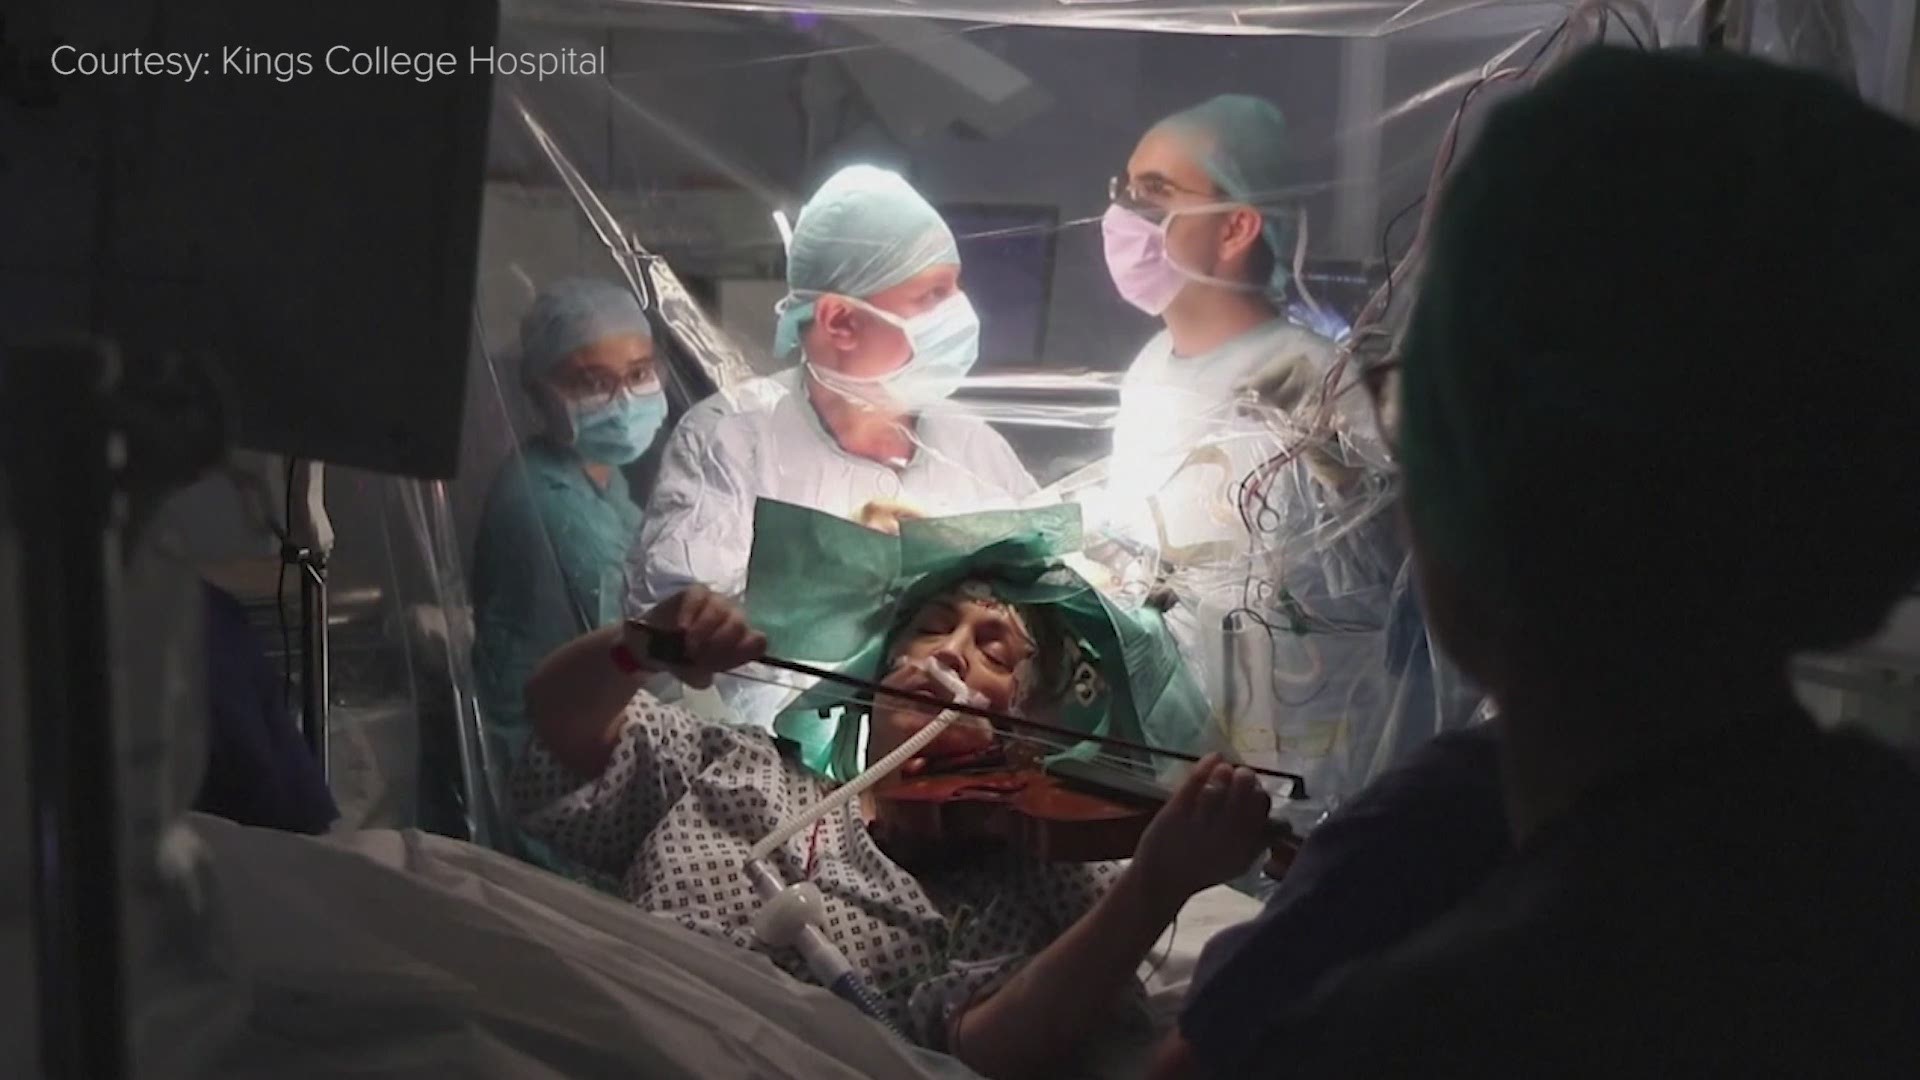 This video shows Dagmar Turner, 53, playing the violin while surgeons removed a tumor from her brain.